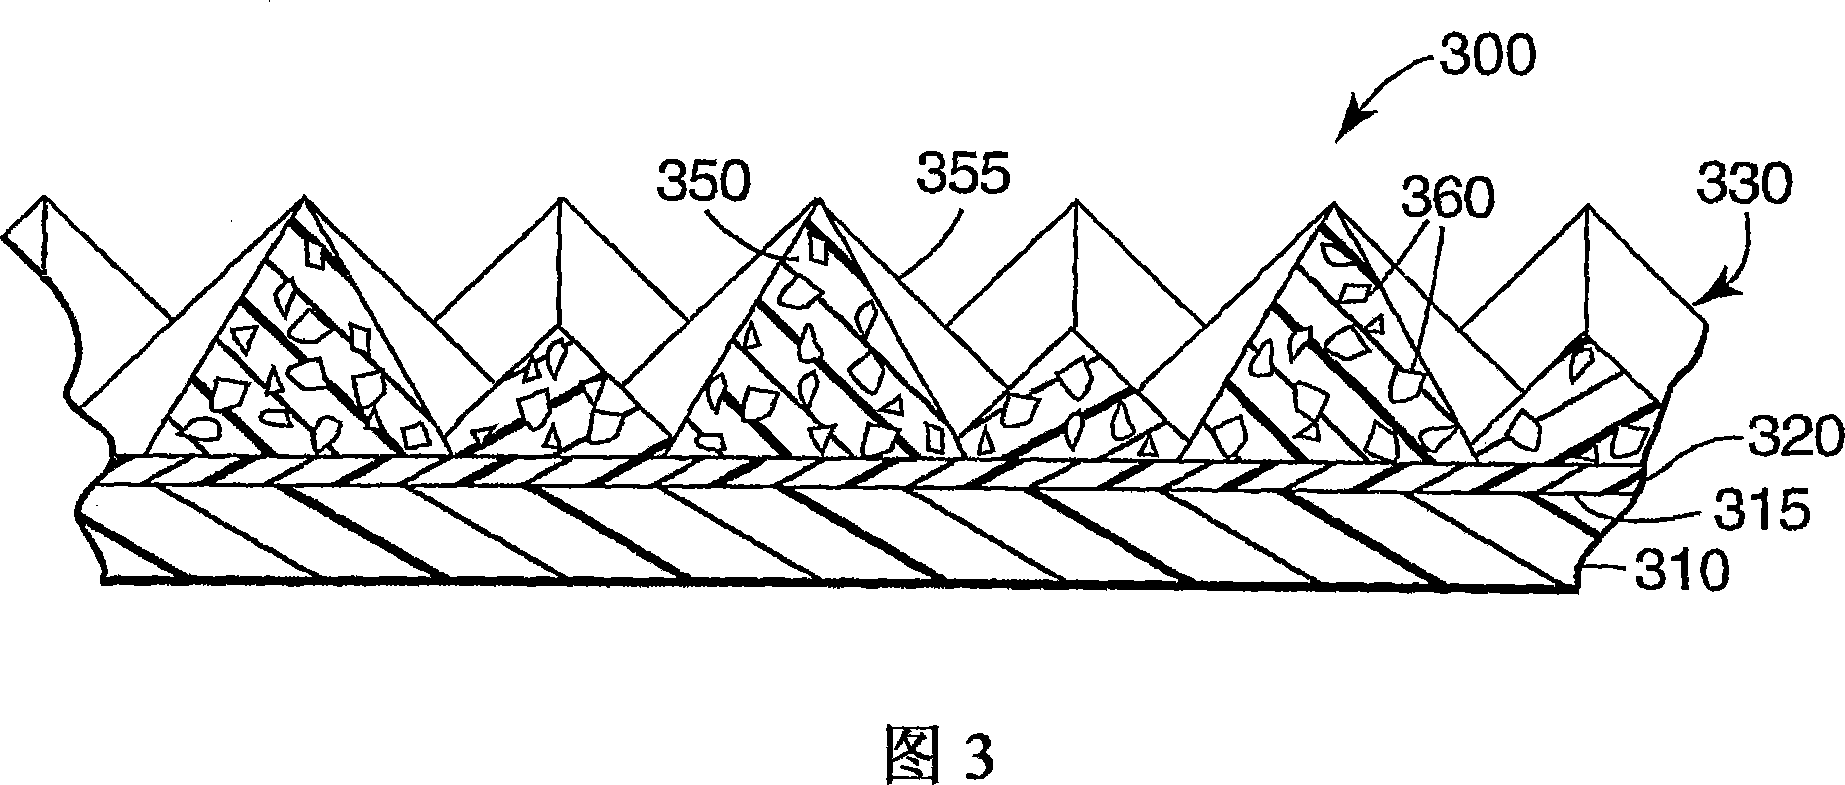 Coated abrasive article with tie layer, and method of making and using the same